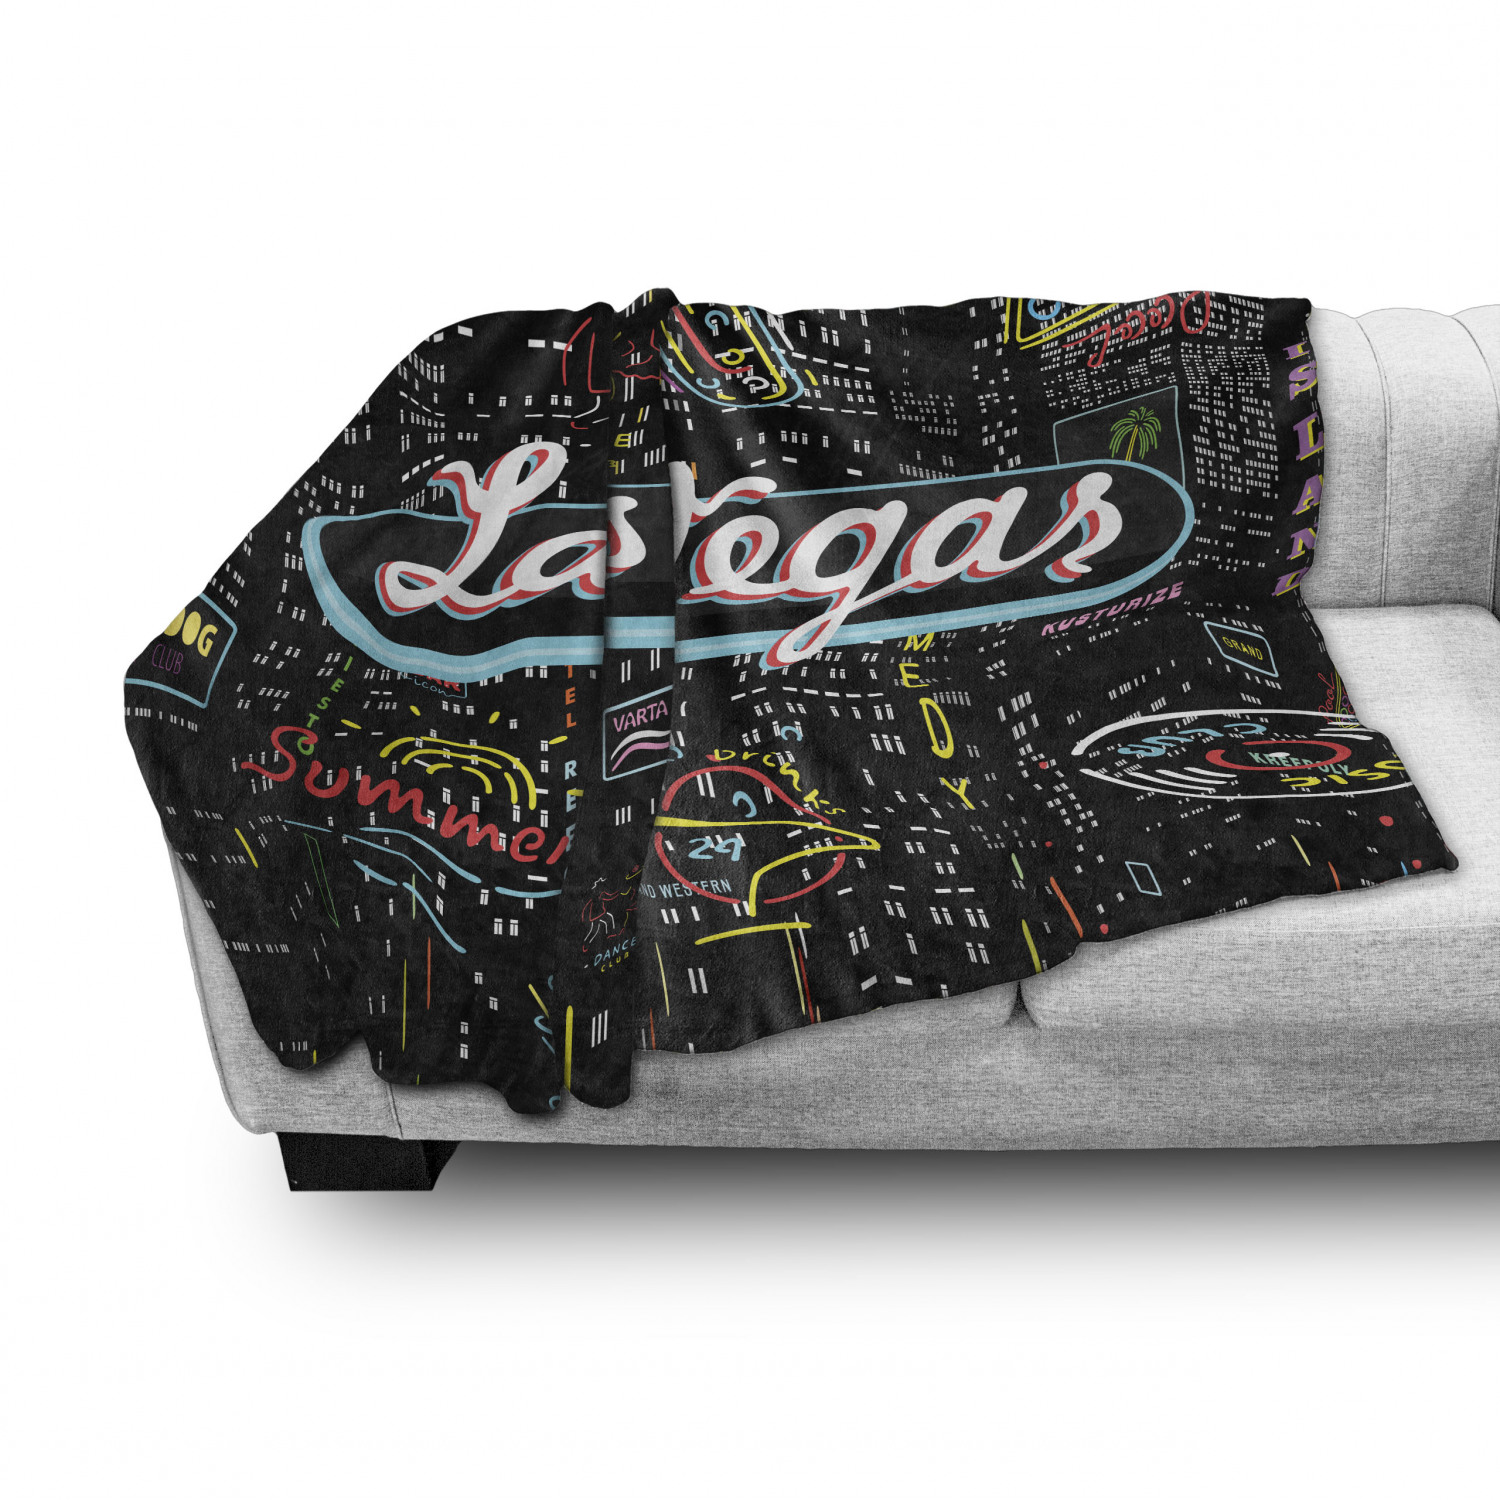 Las Vegas Soft Flannel Fleece Blanket, Colorful Elements of Vegas Entertaintment Monochrome Buildings Sax and Bar Signs, Cozy Plush for Indoor and Outdoor Use, 50" x 70", Multicolor, by Ambesonne - image 3 of 6